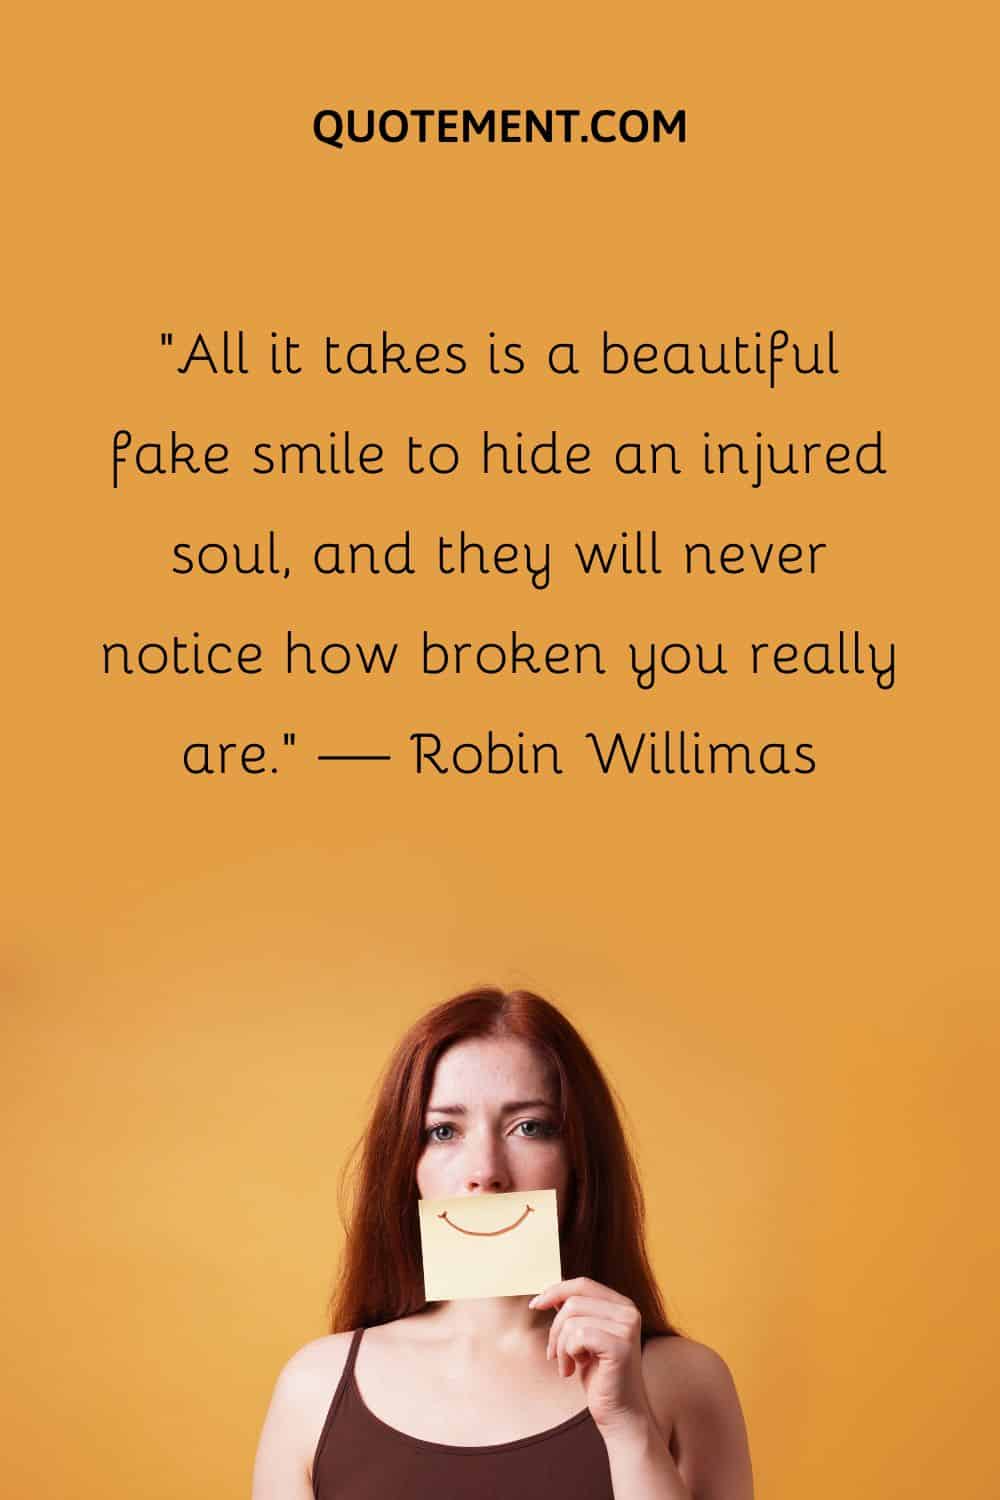 All it takes is a beautiful fake smile to hide an injured soul